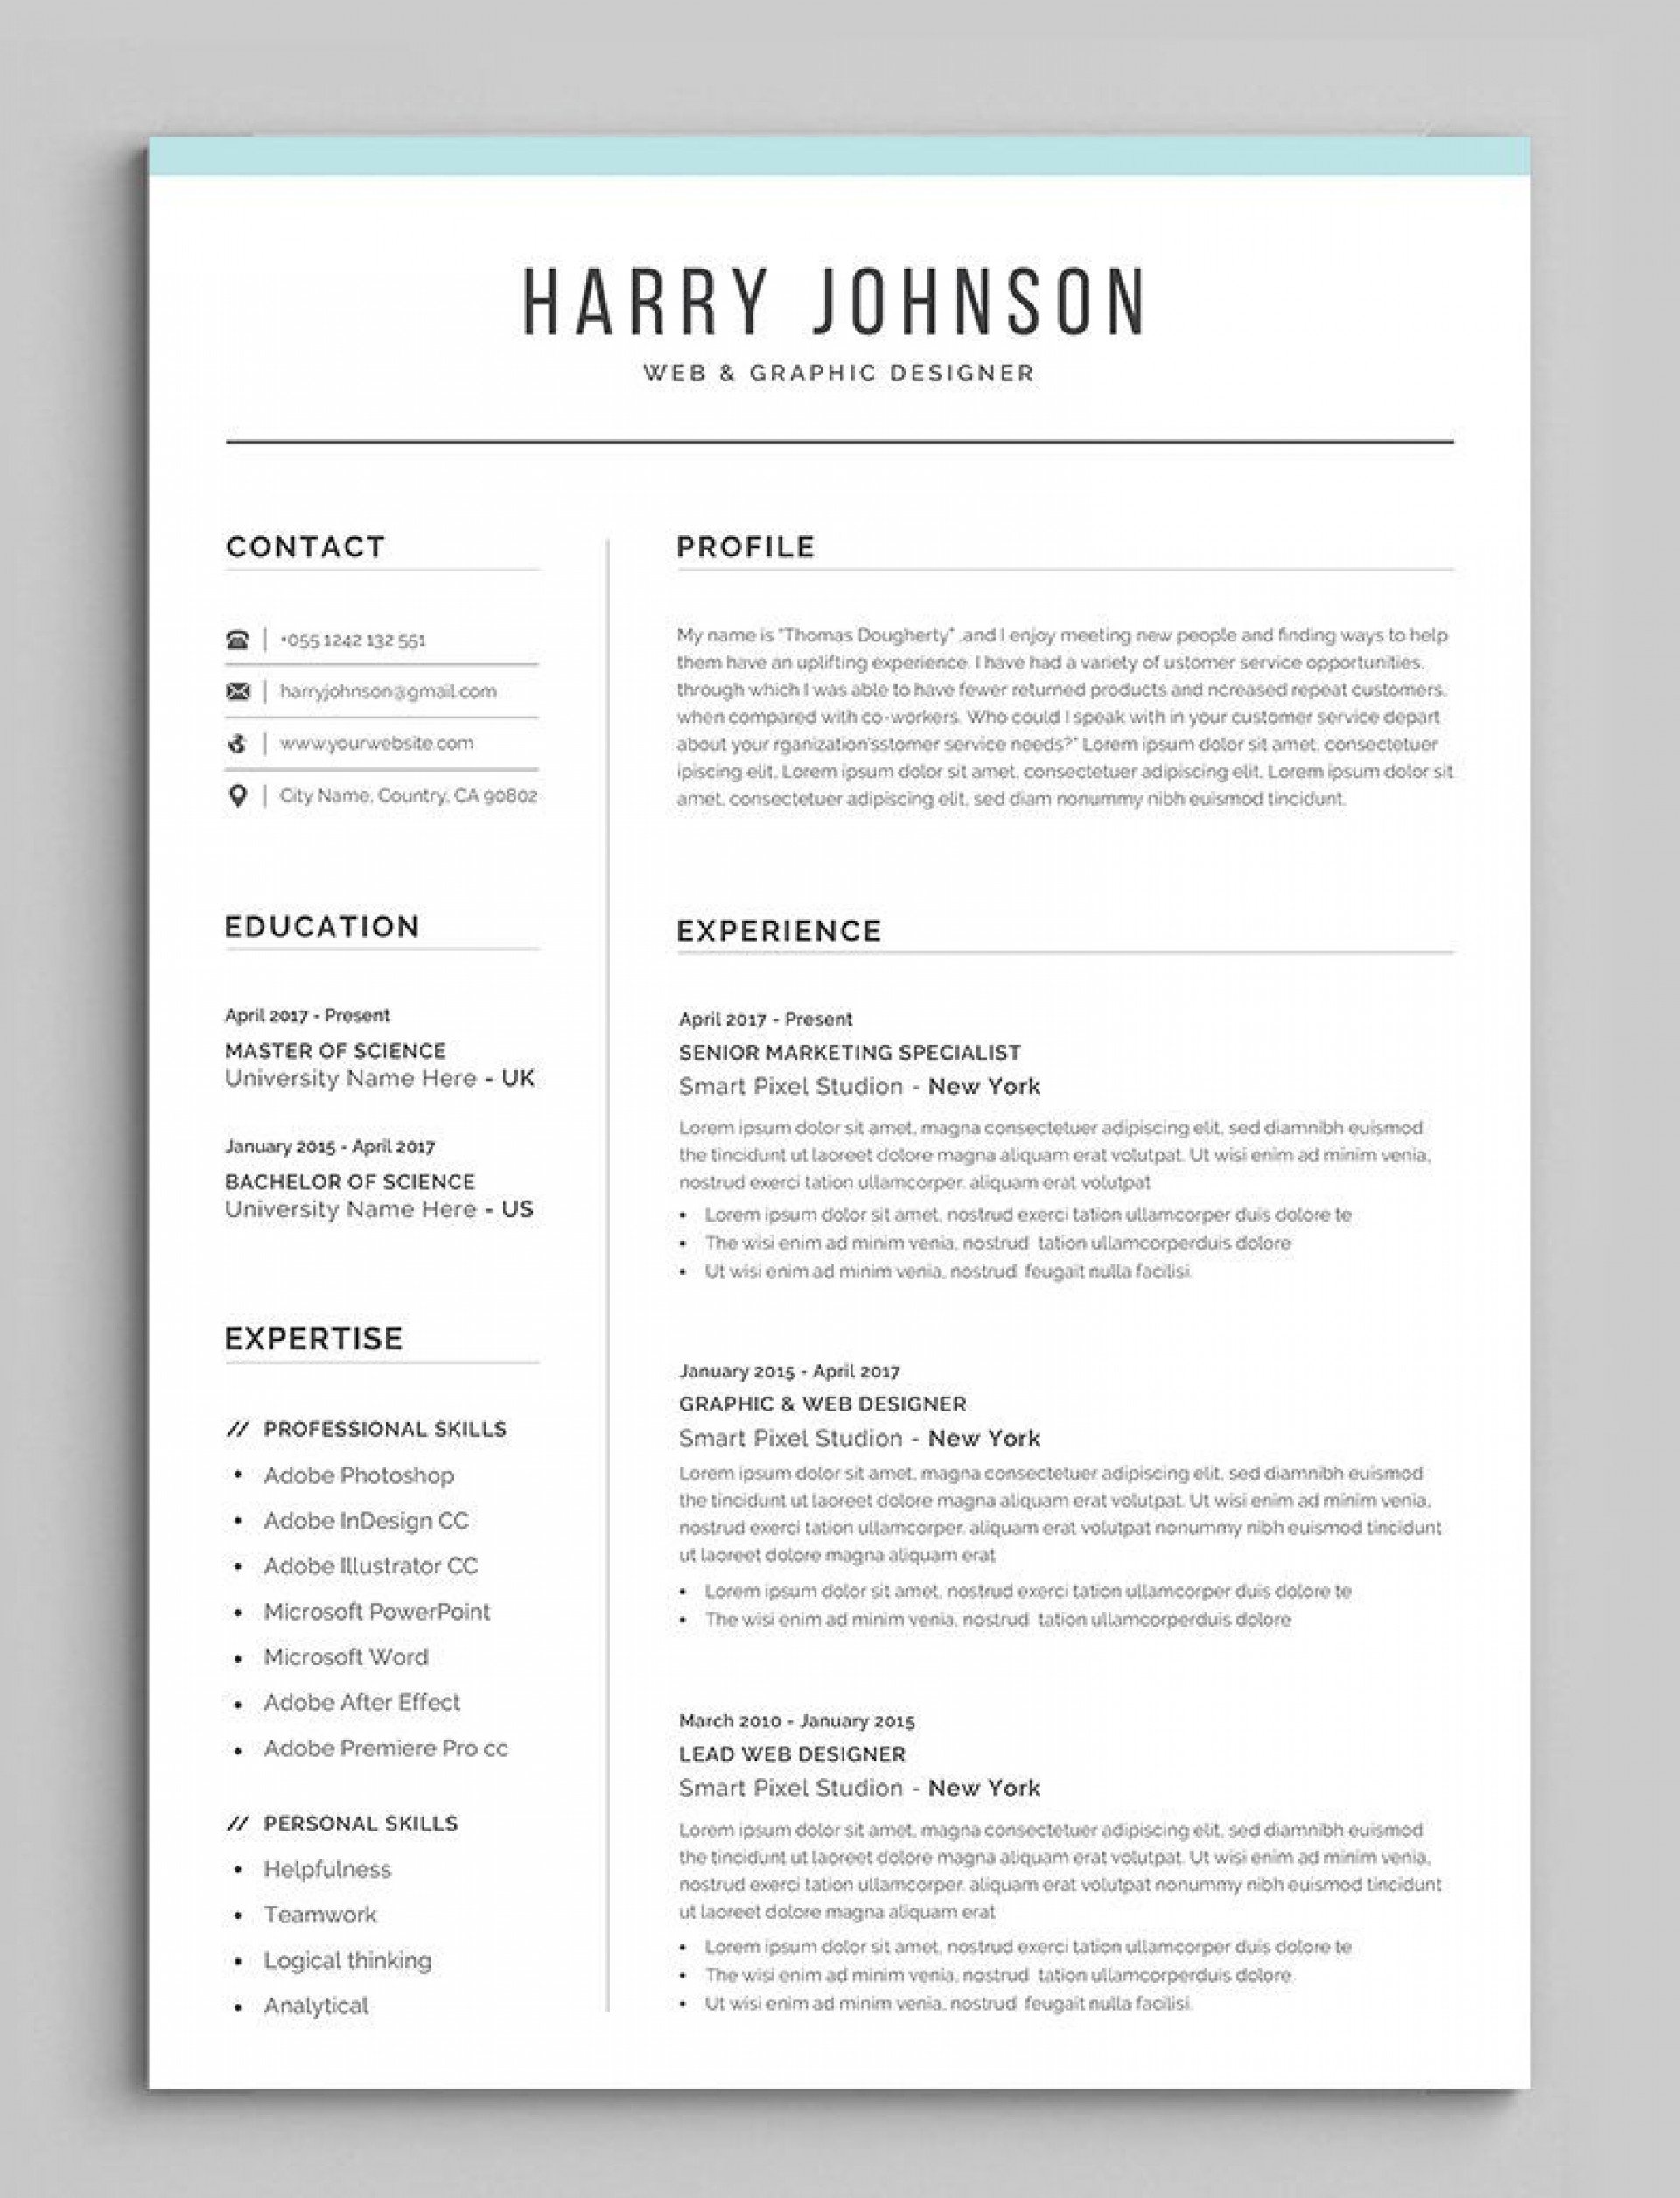 Create Your Own Resume Template In Word ~ Addictionary